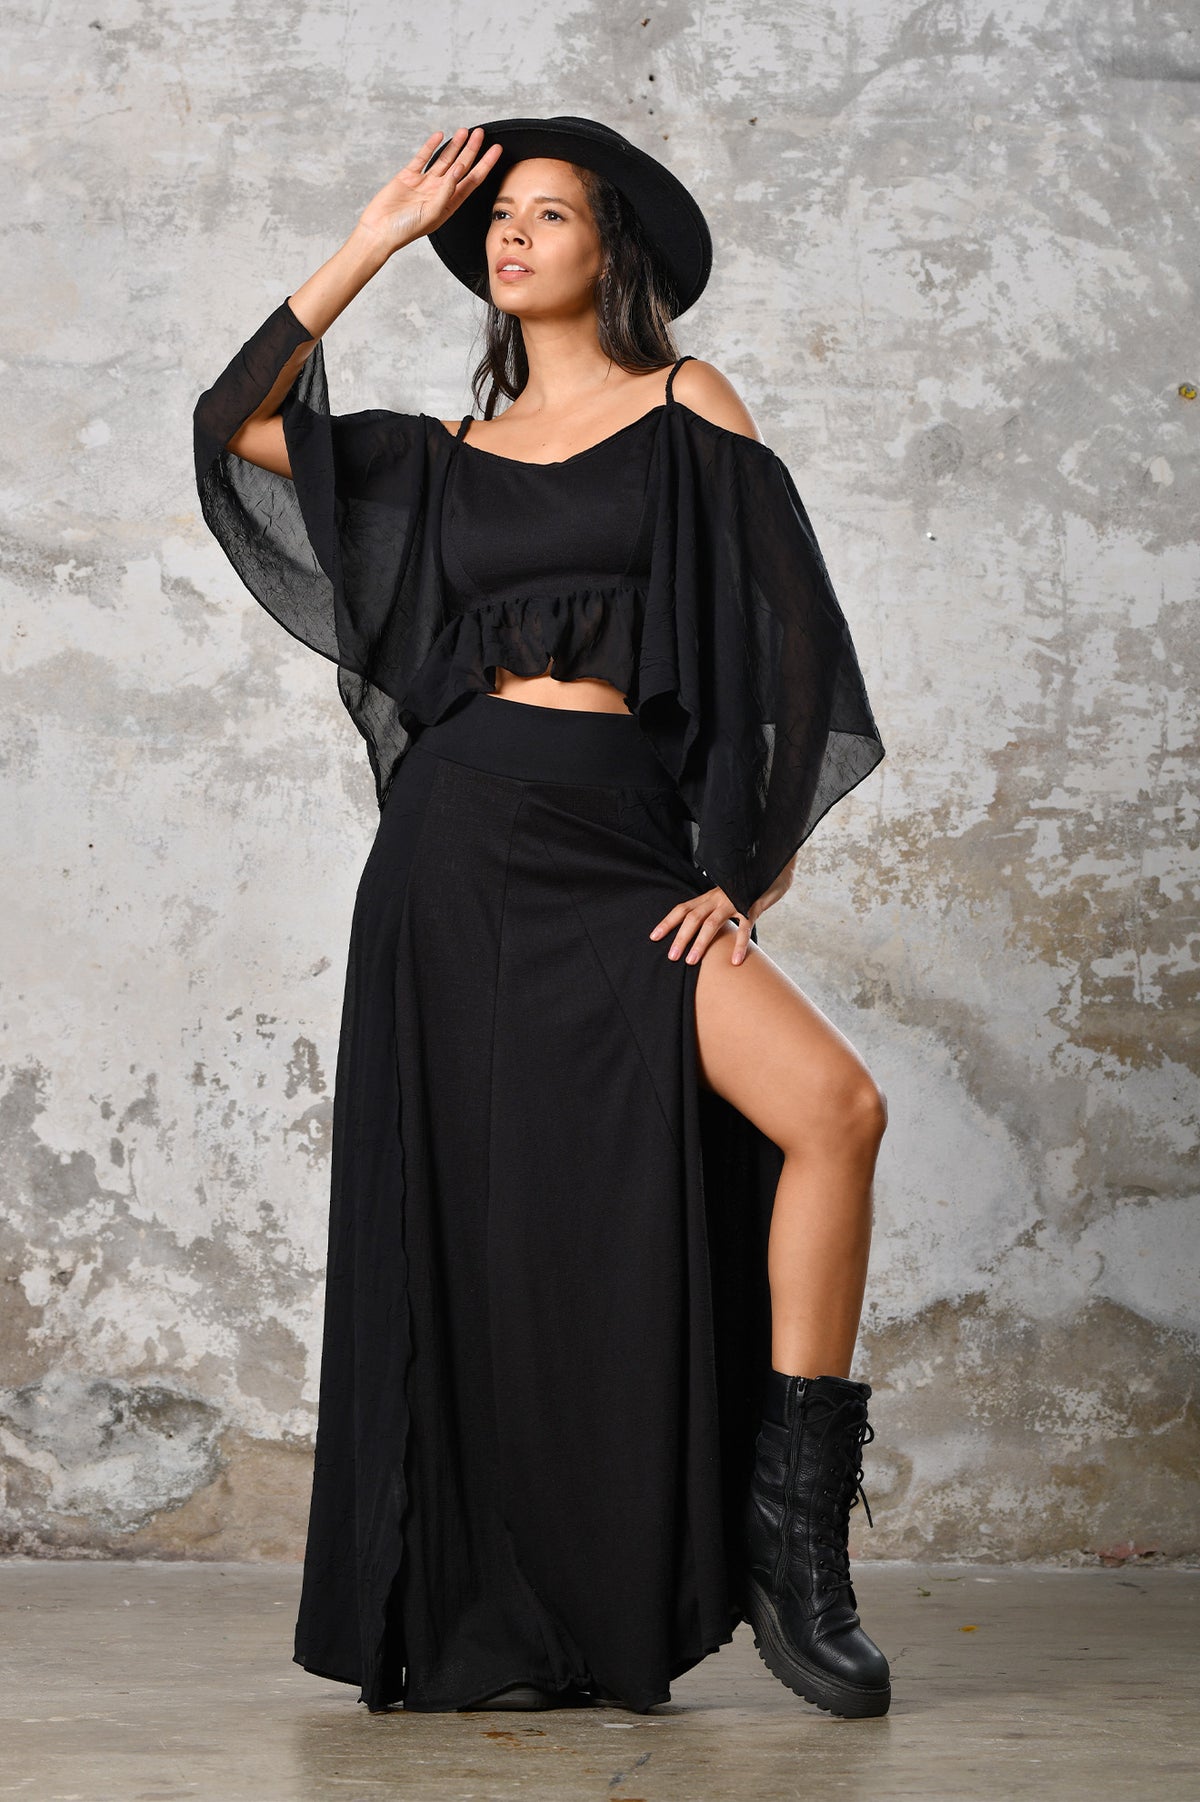 An enchanting Bohemian Venus black blouse, perfect for boho and festival-inspired looks, exuding a goddess-like quality. The flowy fabric and intricate side details create an ethereal, bohemian style perfect for Burning Man and other occasions. This garment is an ethically crafted gem